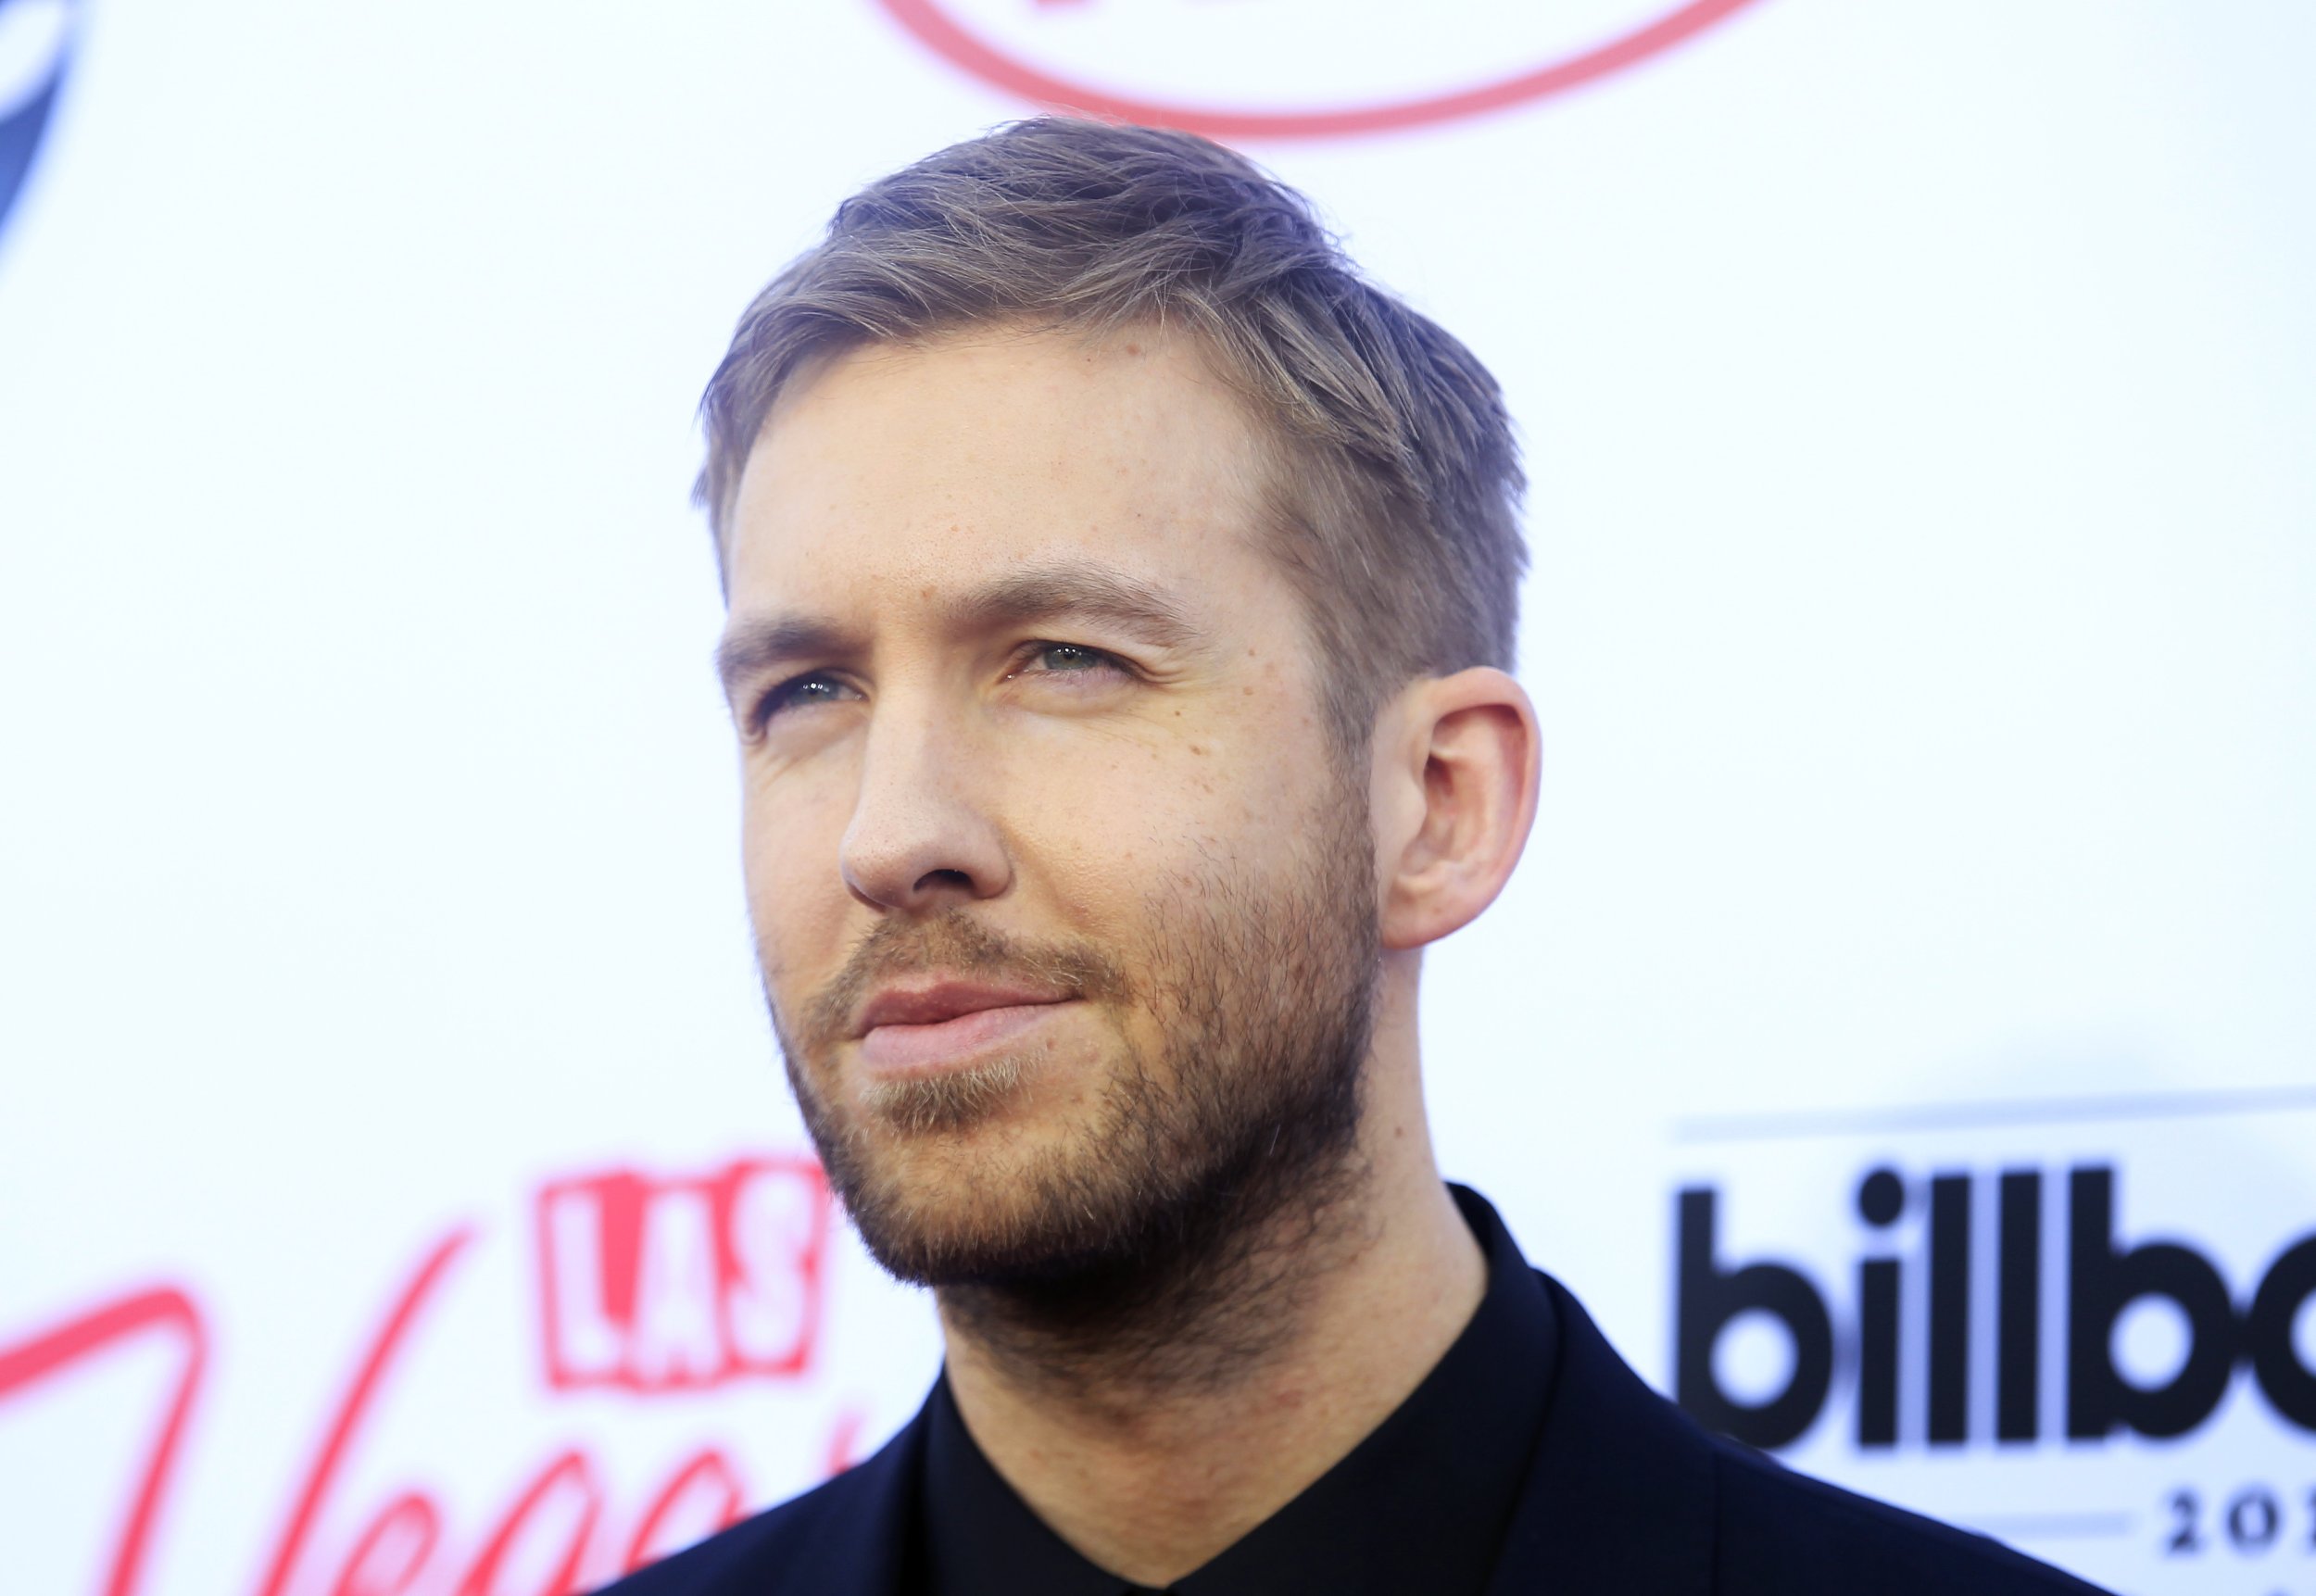 Calvin Harris confirms breakup with Taylor Swift